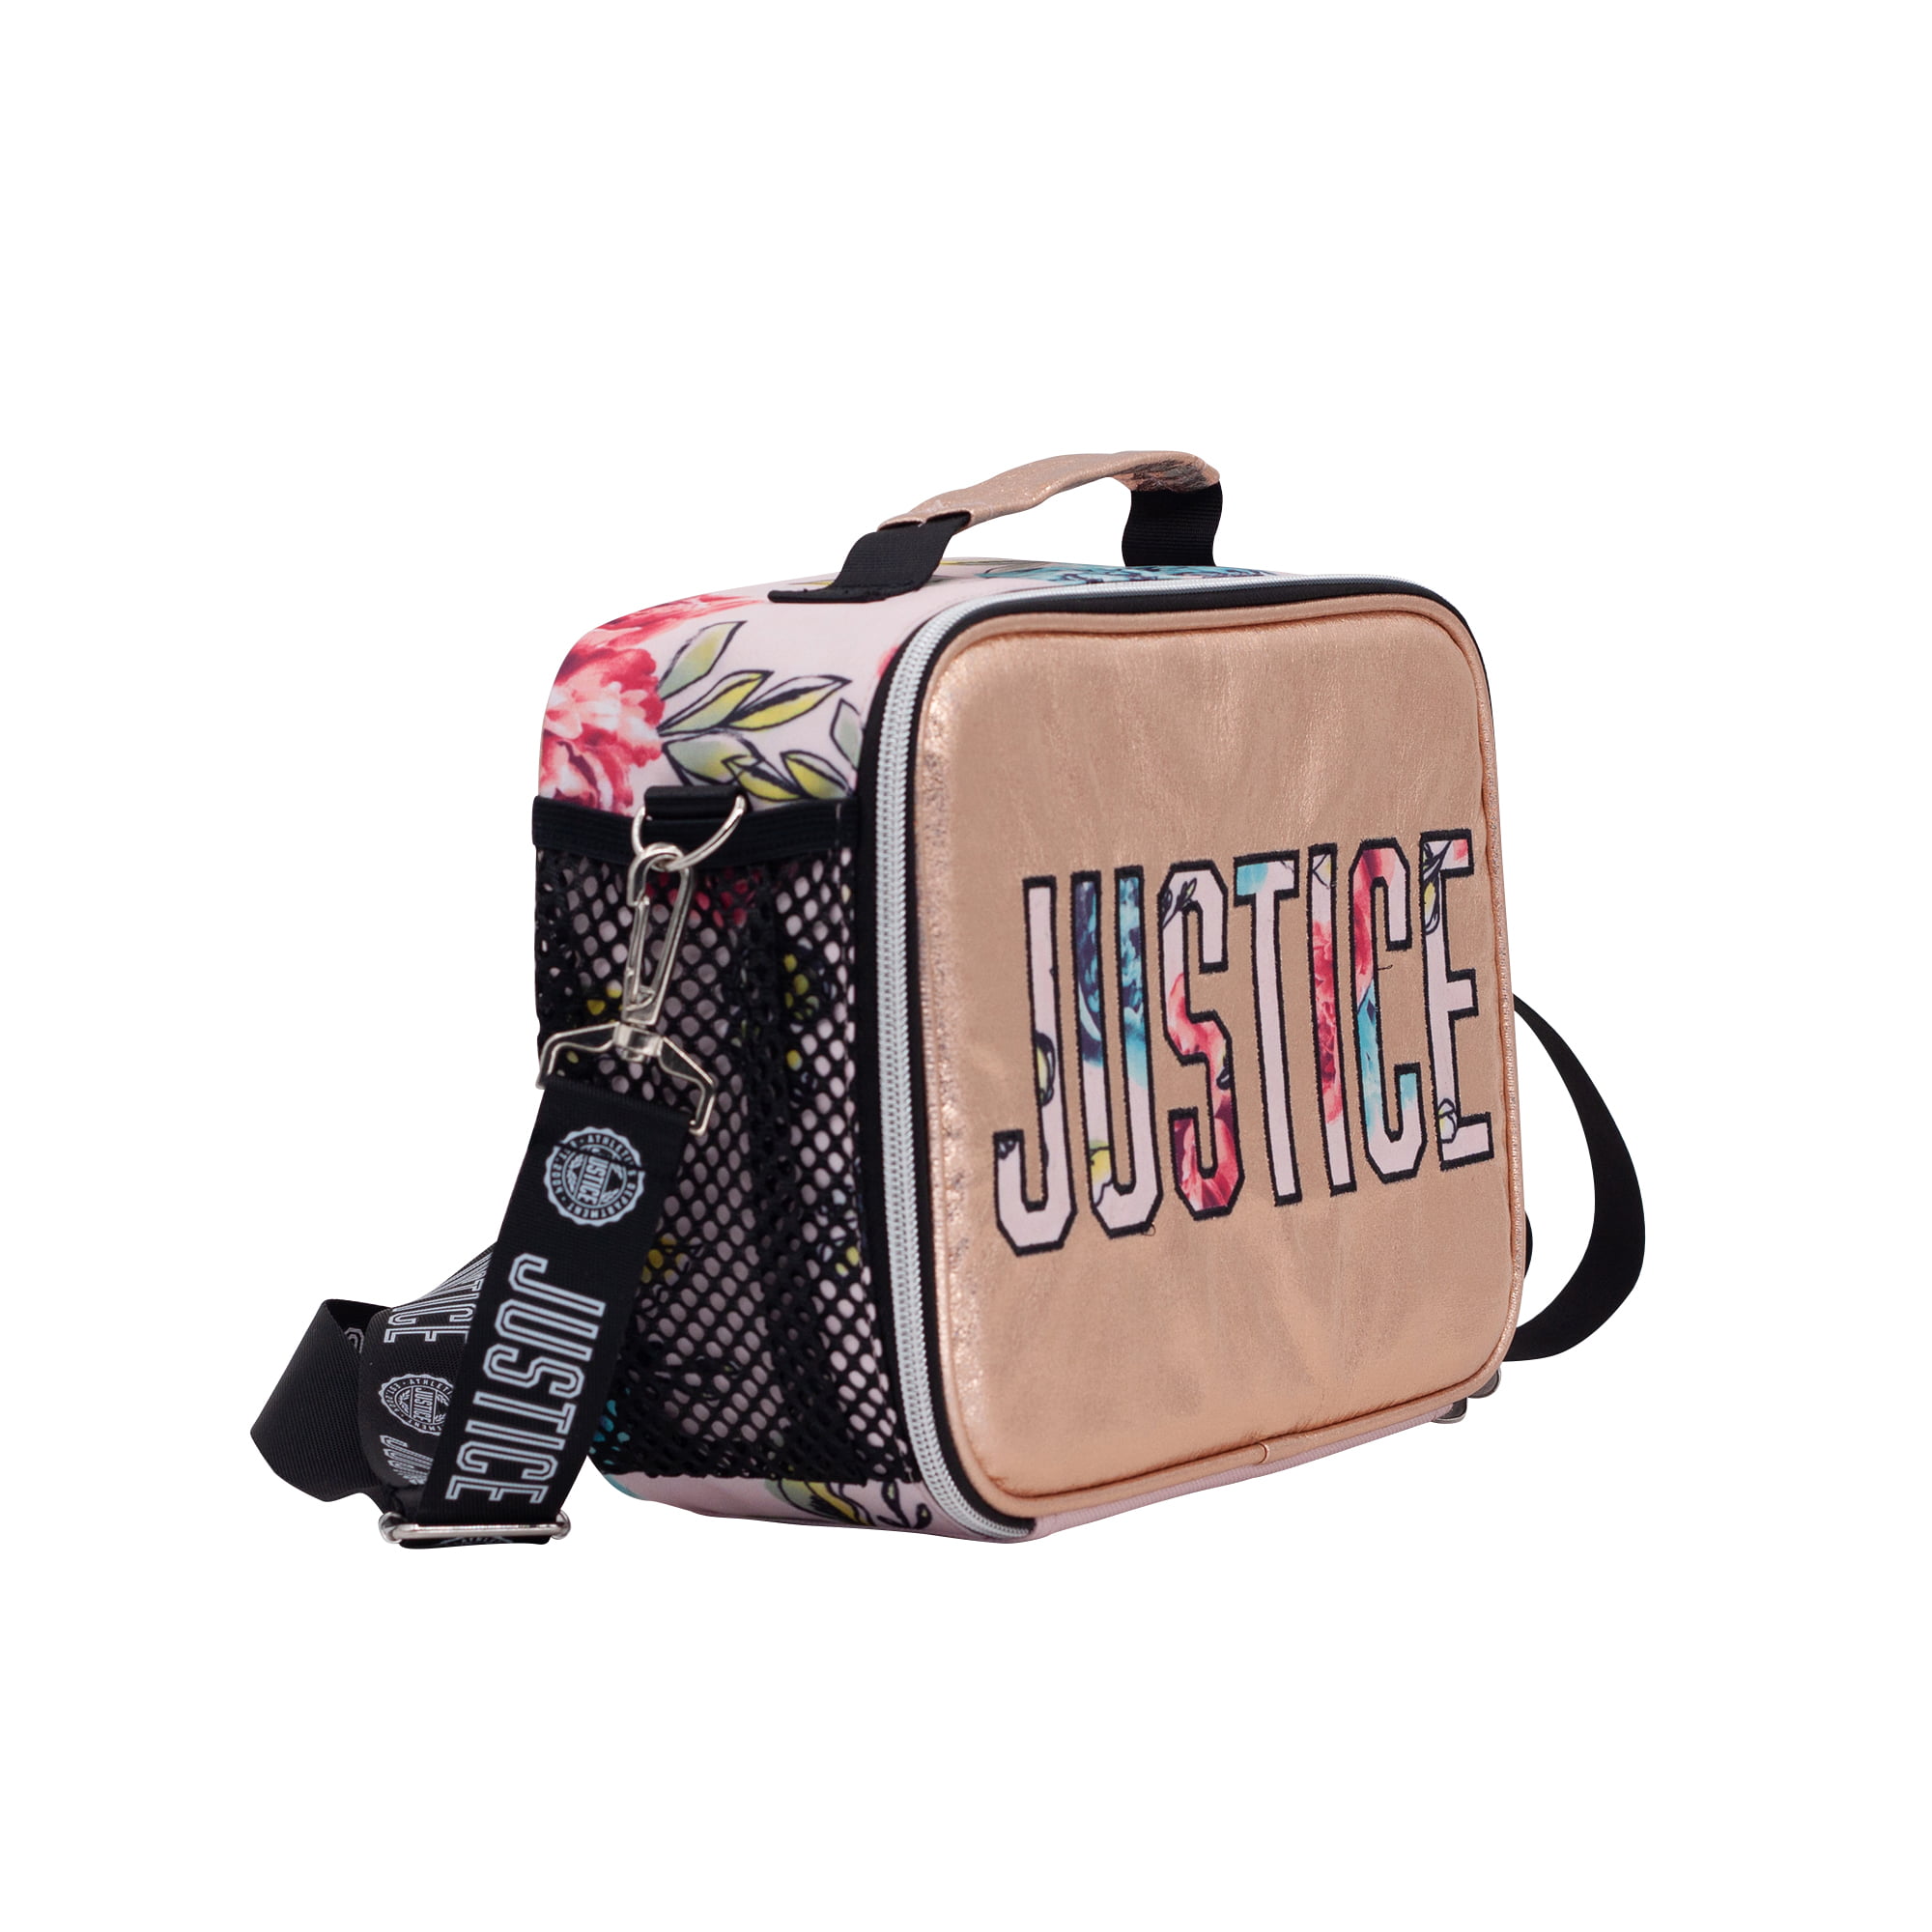 Justice Sport Metallic Rose Gold Insulated Lunch Box for Kids and Adults,  BPA Free 